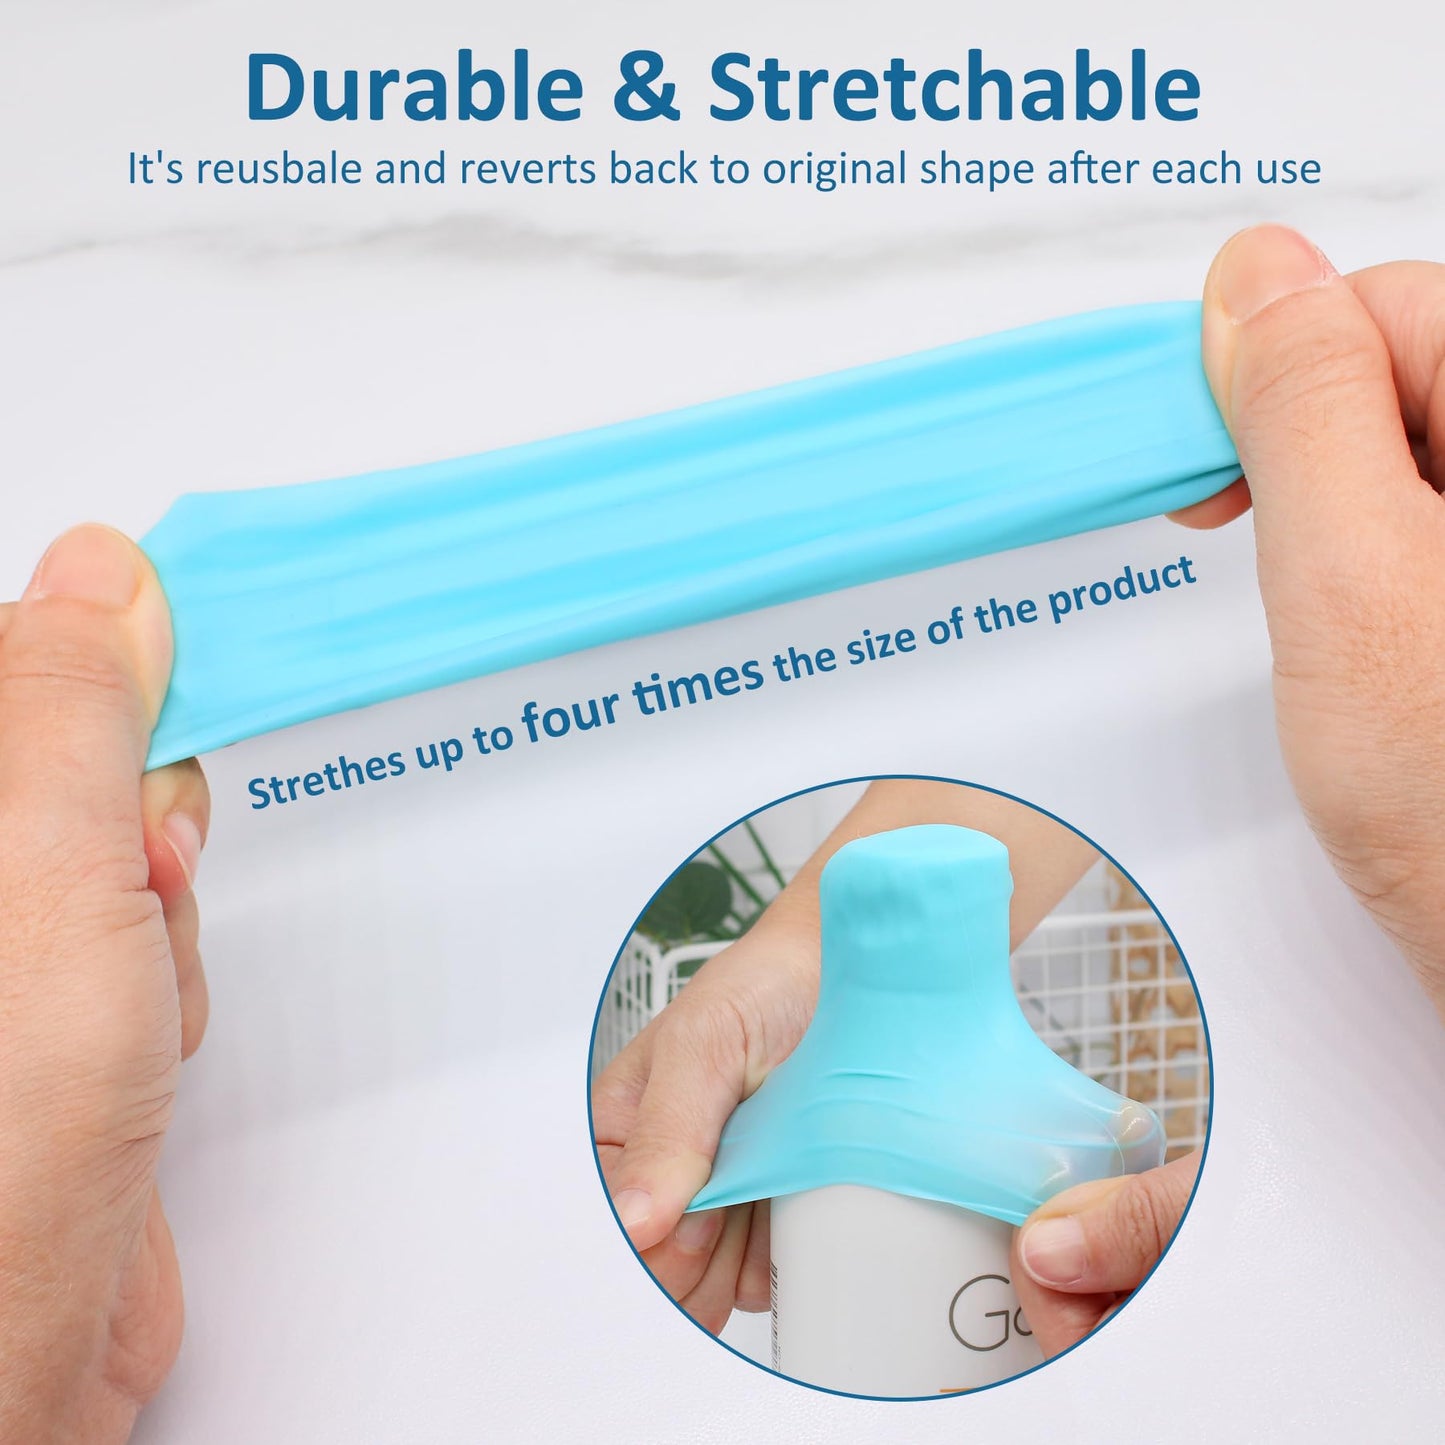 FOROUME 10 Pack Elastic Sleeves for Leak Proofing, Cruise Ship Essentials, Travel Accessories Luggage for Women Men, Travel Essentials Silicone Bottle Covers, Fit Most Travel Size Bottles Toiletries